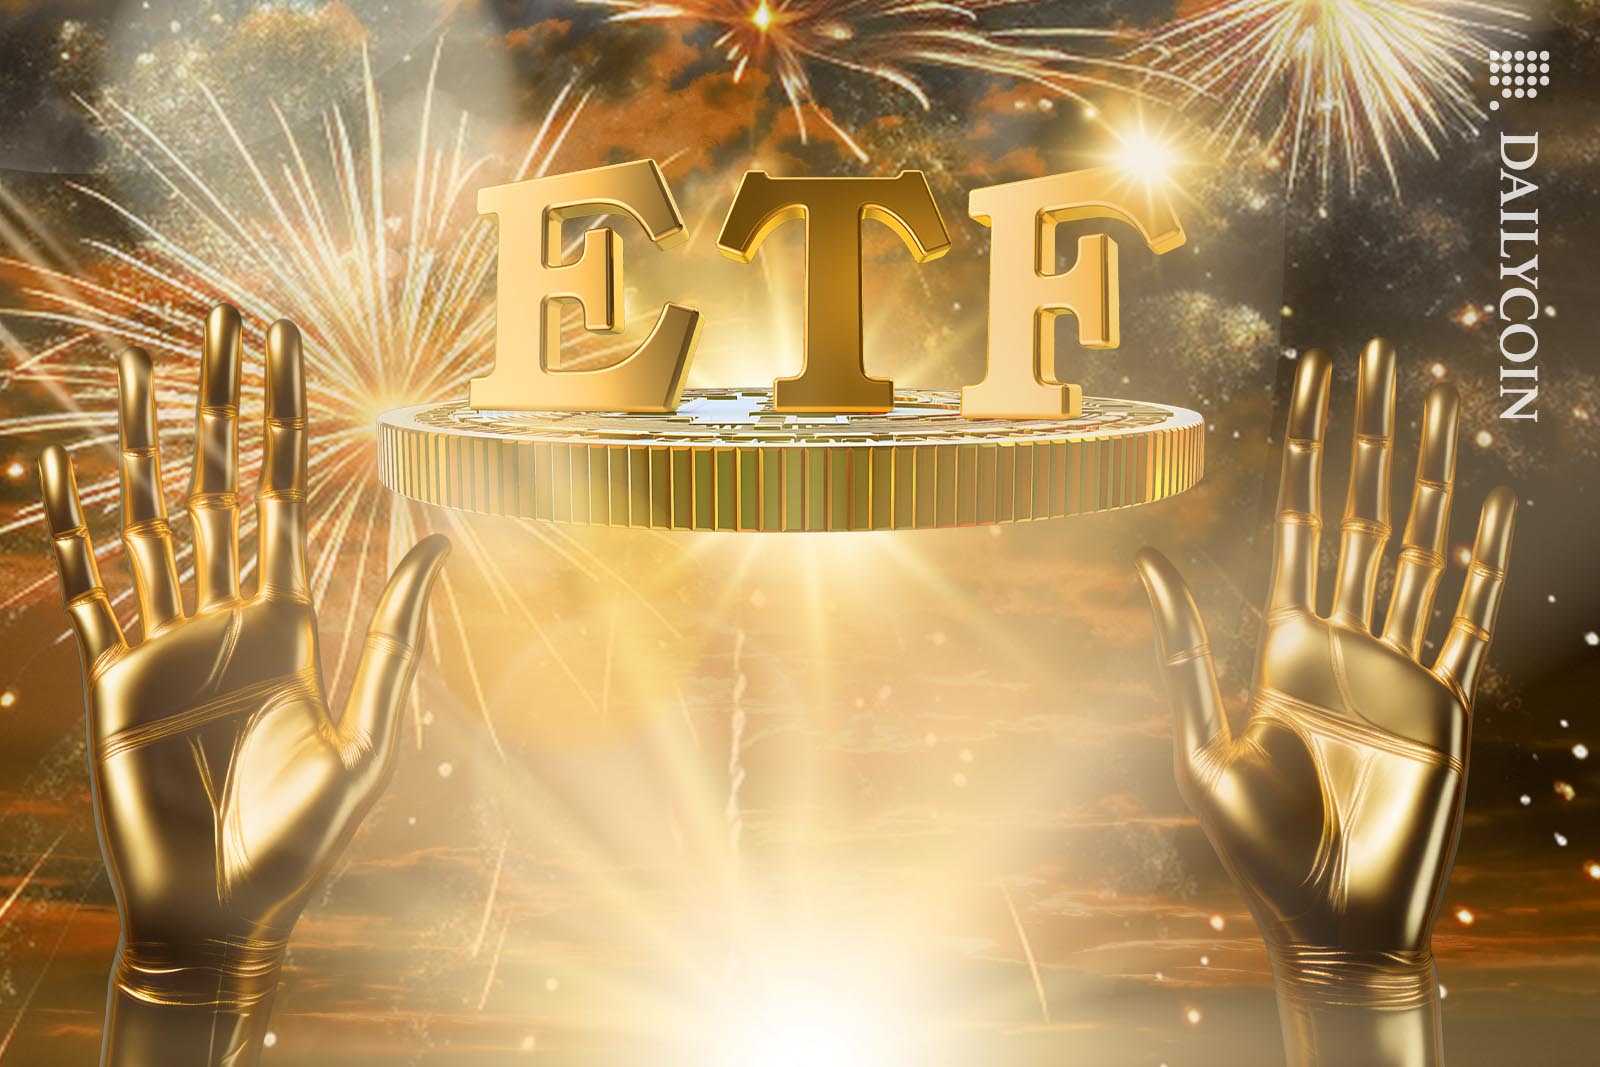 Big ETF sign on top of Bitcoin being raised by huge golden hands surrounded by fireworks.